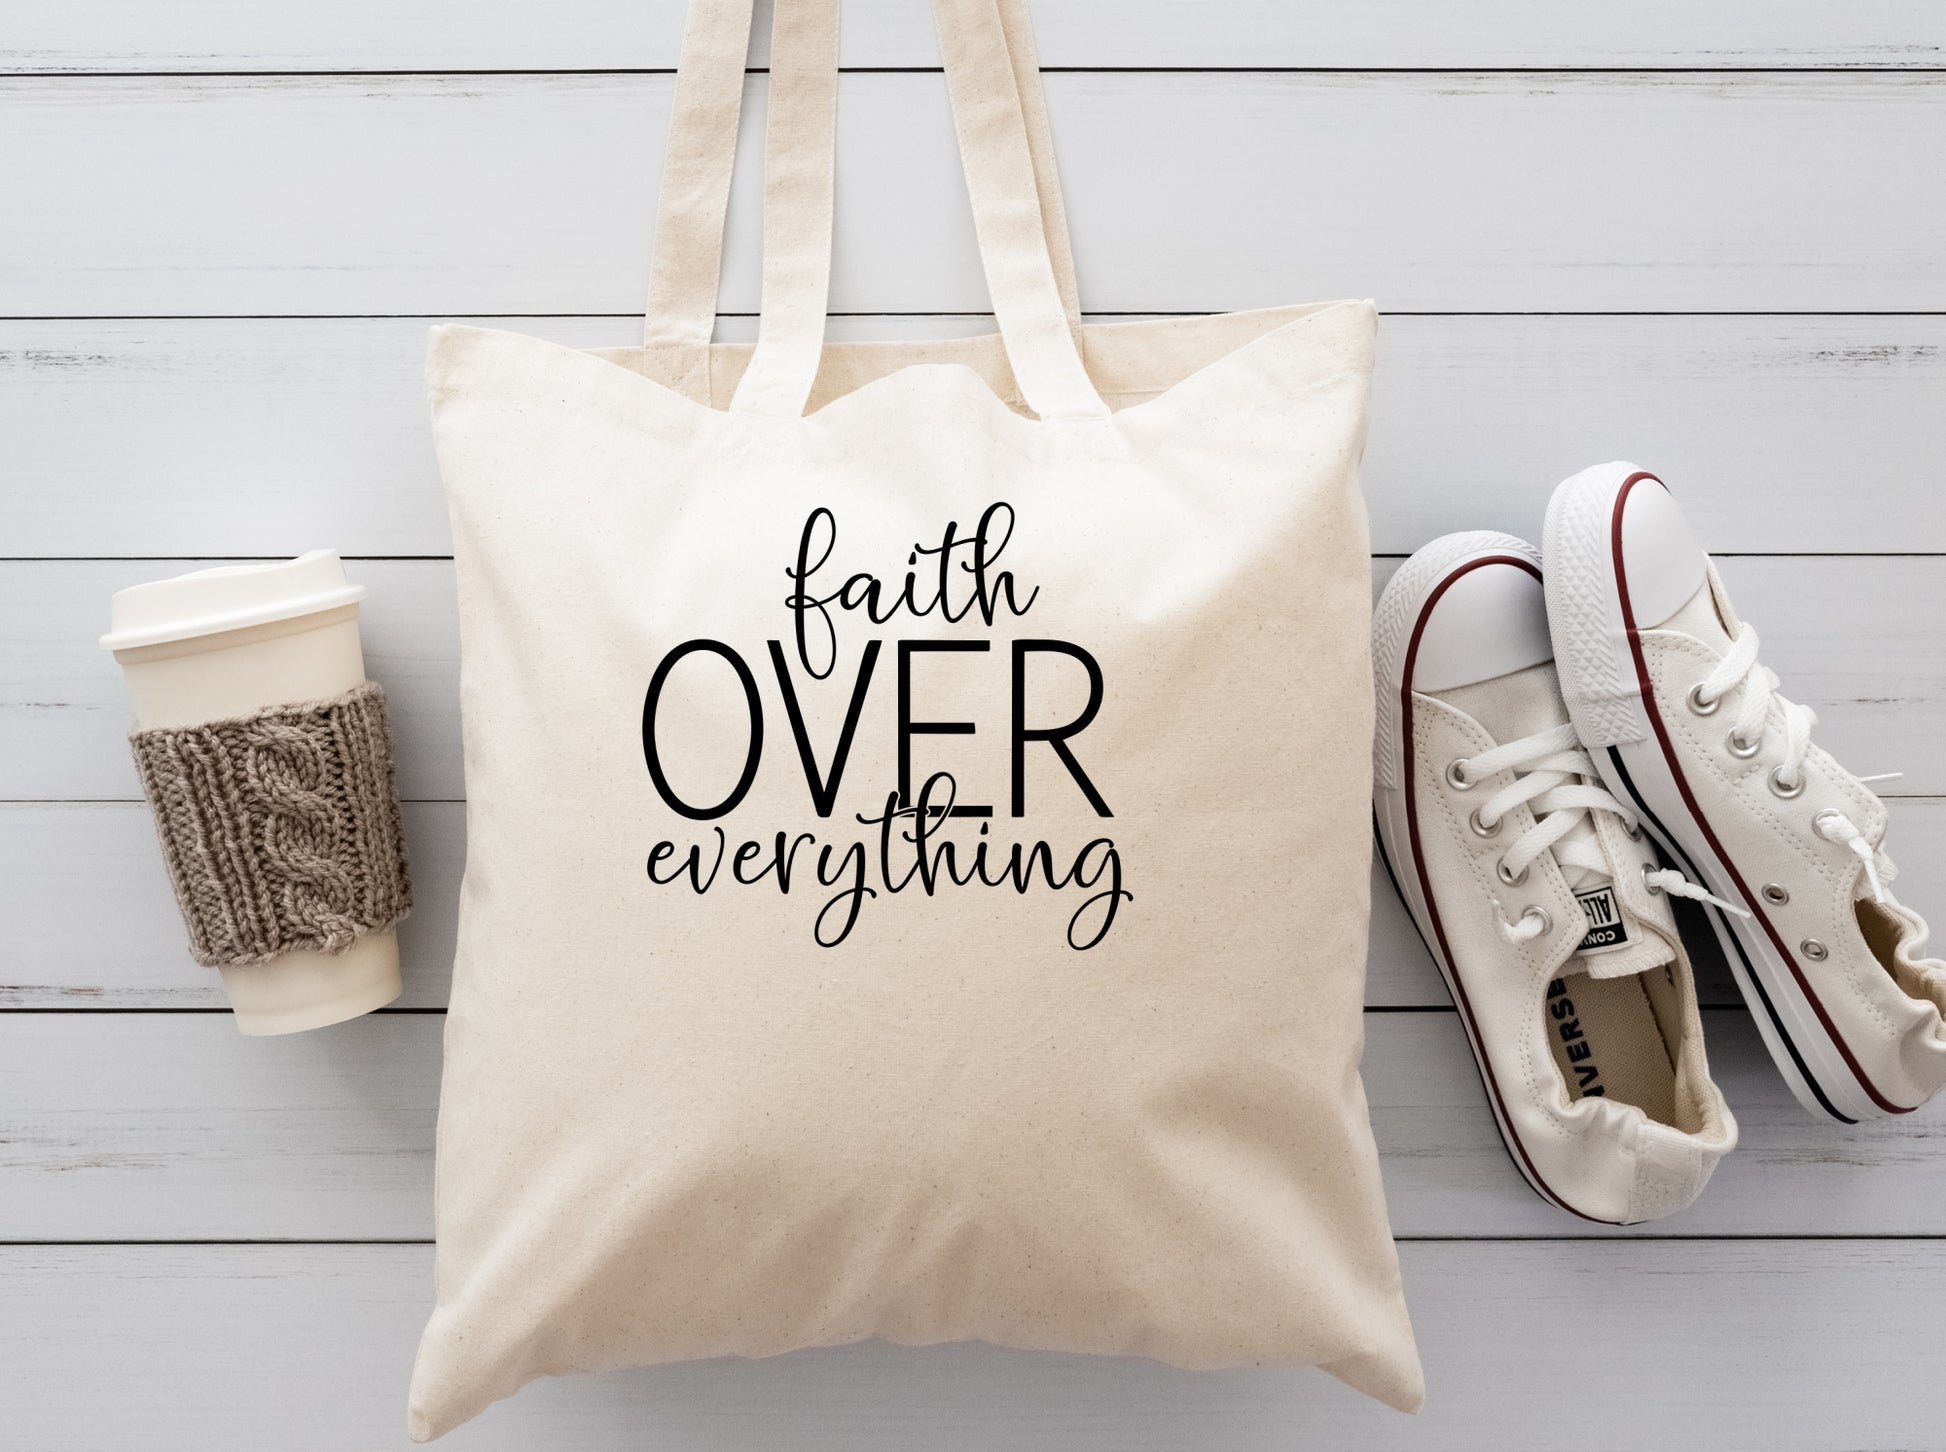 cream colored cloth reusable tote bag saying Faith over everything in black